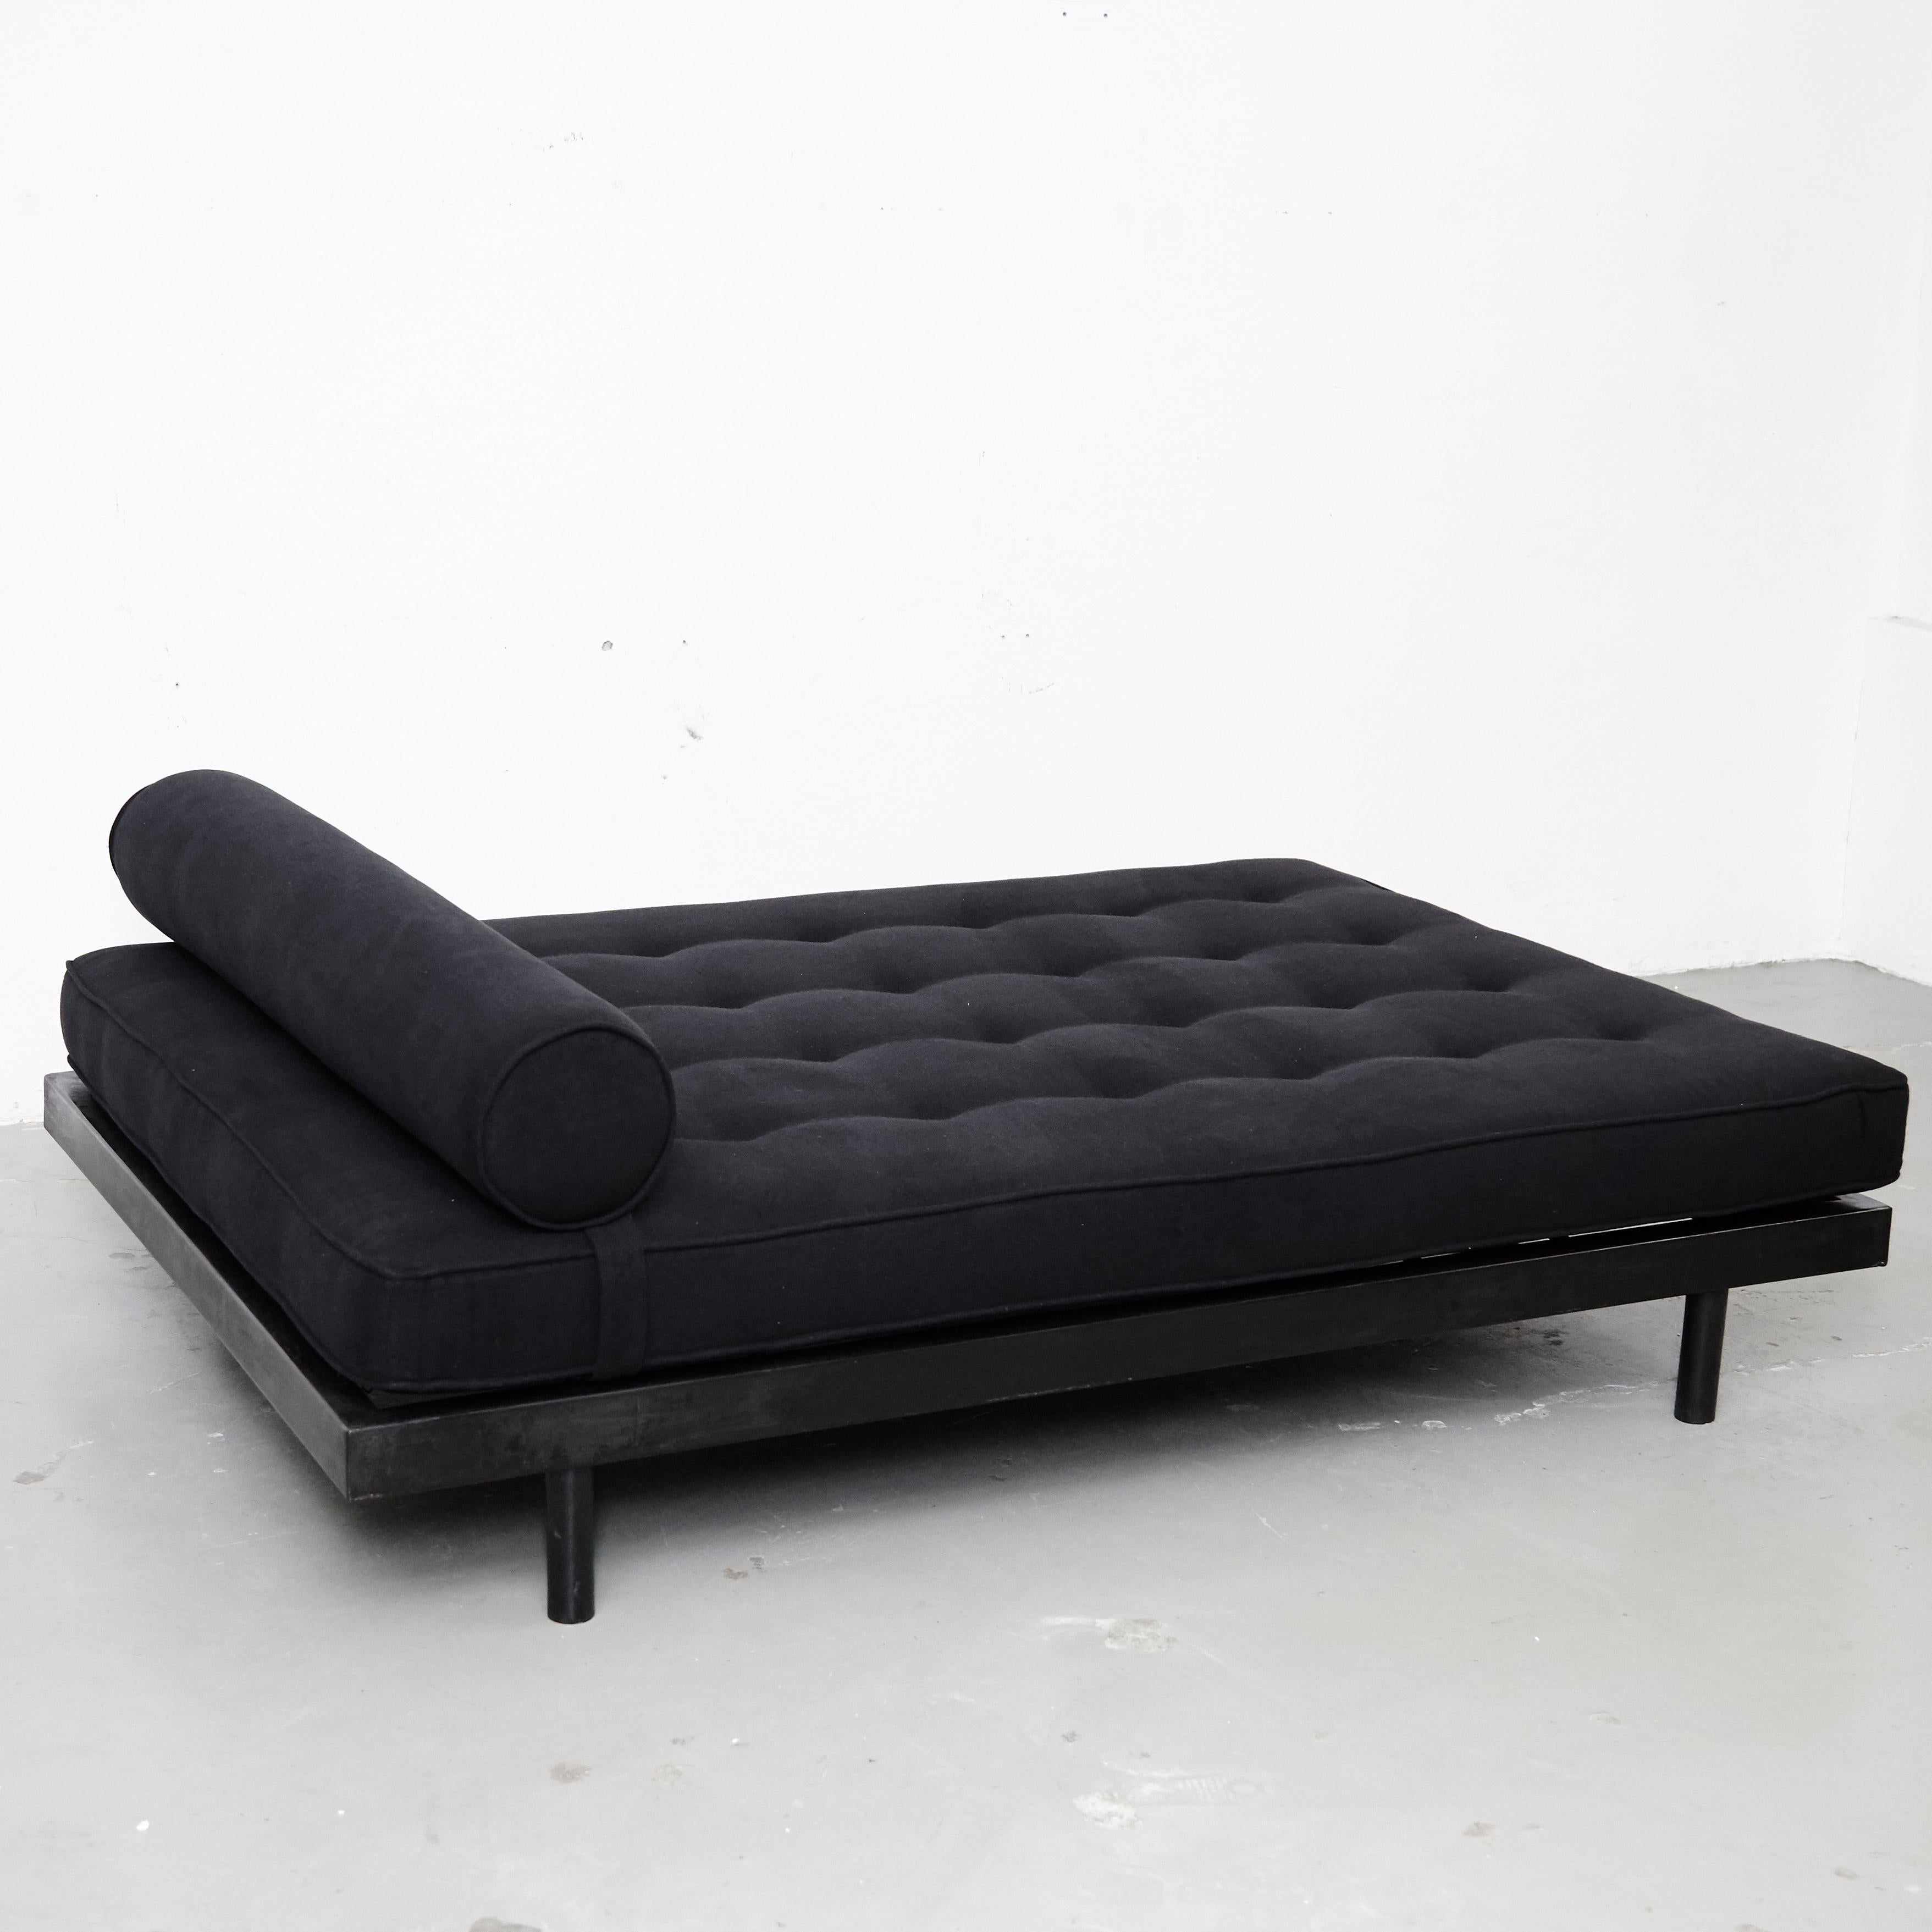 Mid-Century Modern Rare S.C.A.L. Double Daybed by Jean Prouvé, circa 1950